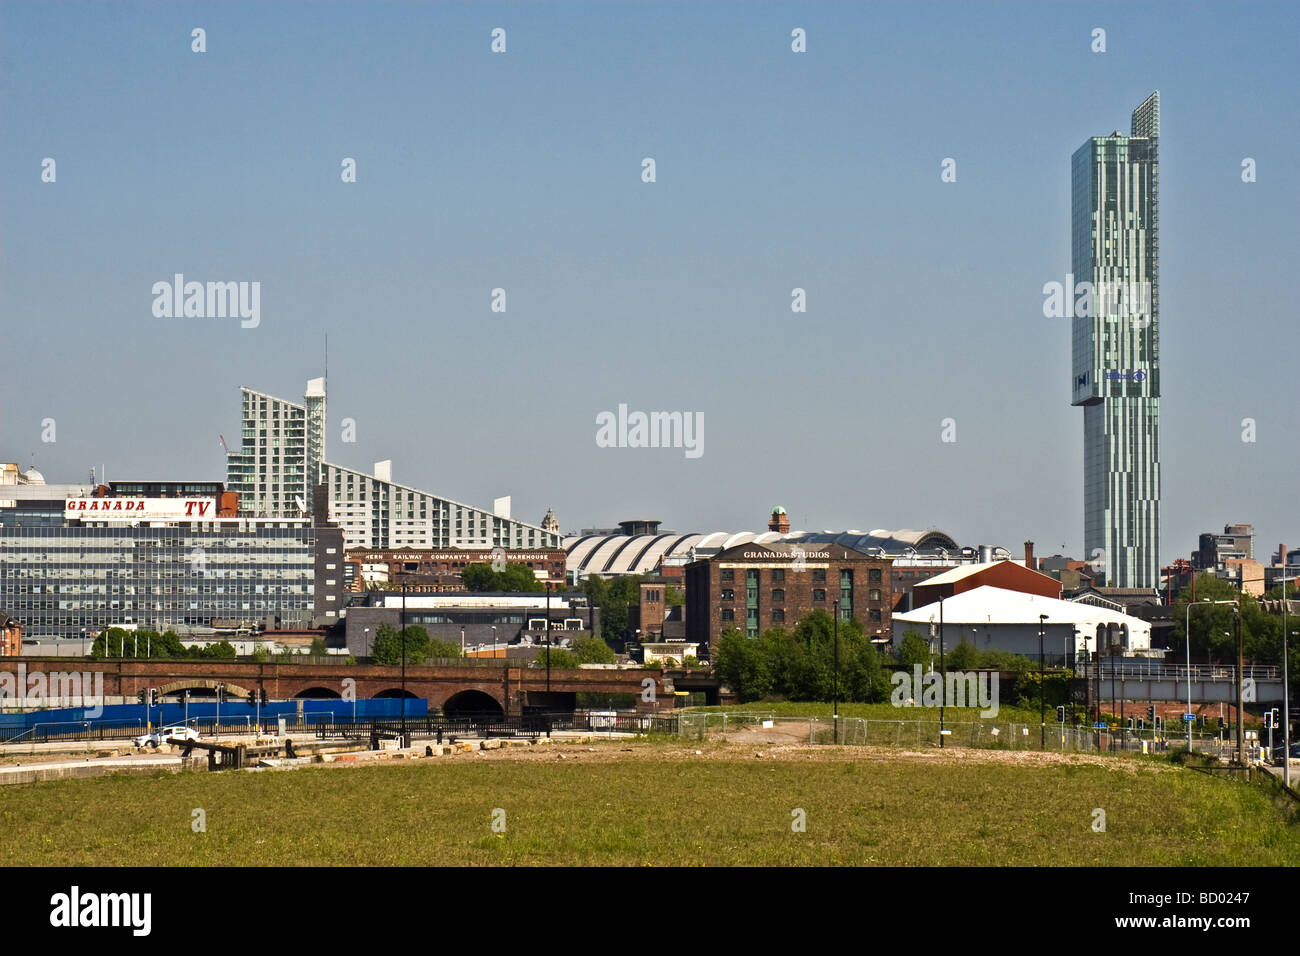 Manchester skyline with Beetham Tower on right, Manchester, UK Stock Photo